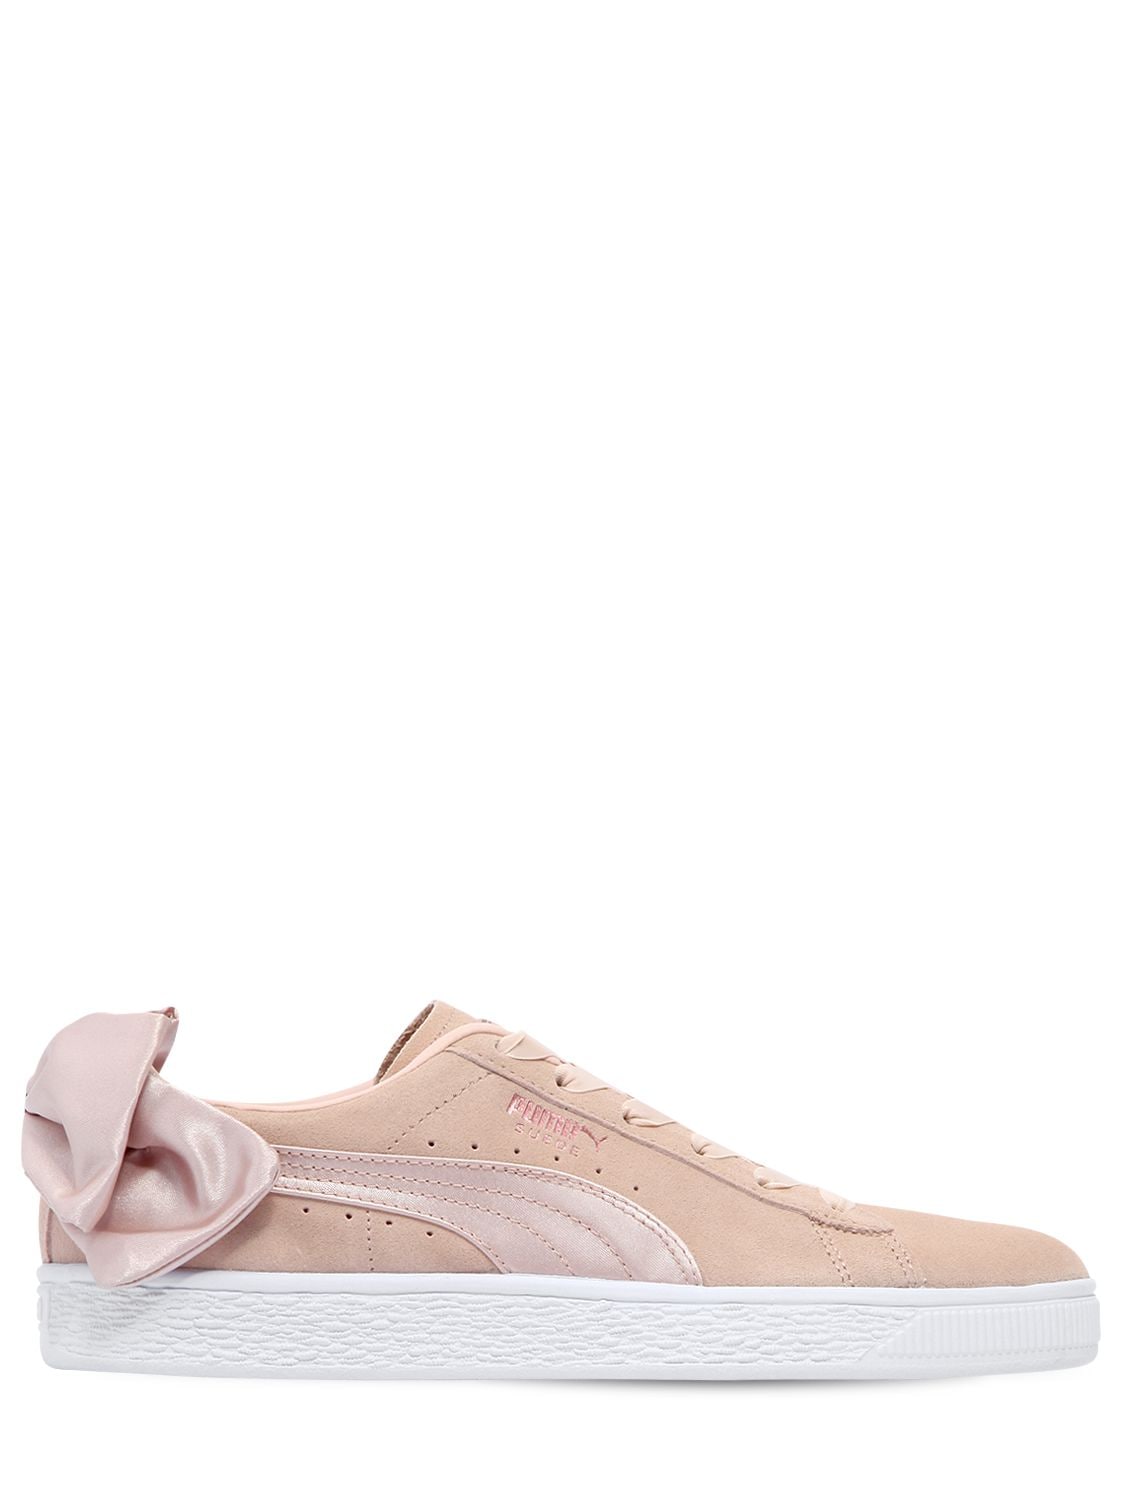 Puma Bow Val Suede Sneakers In Beige